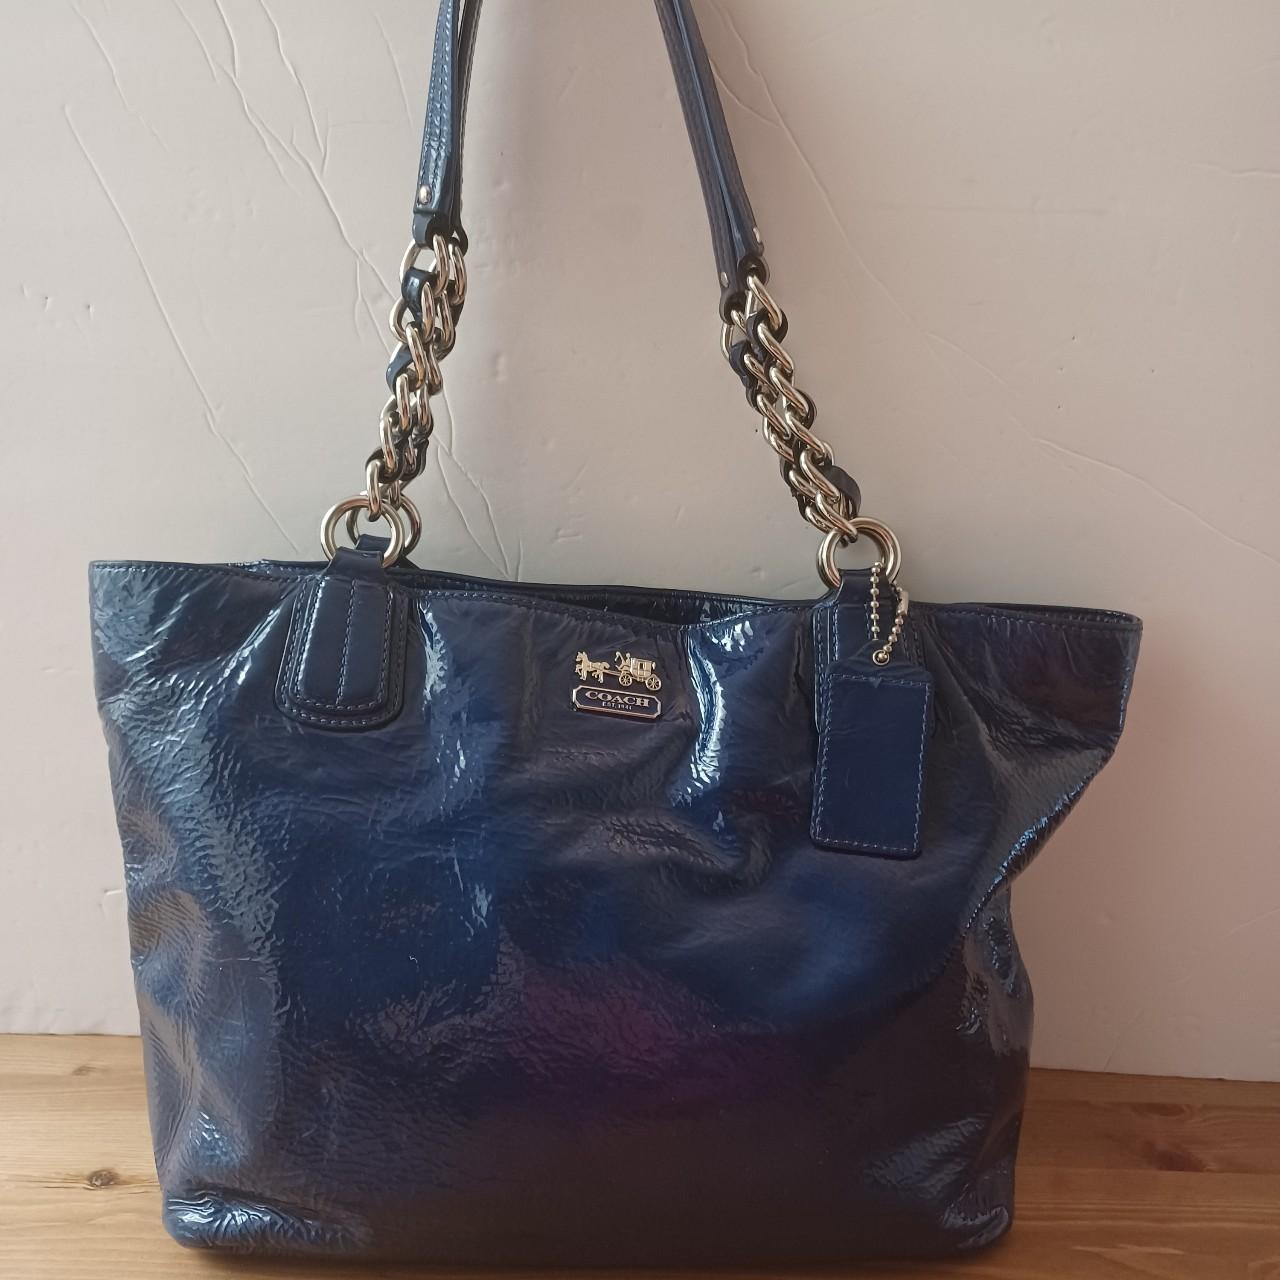 Elevate your outfit with these stunning Coach - Depop